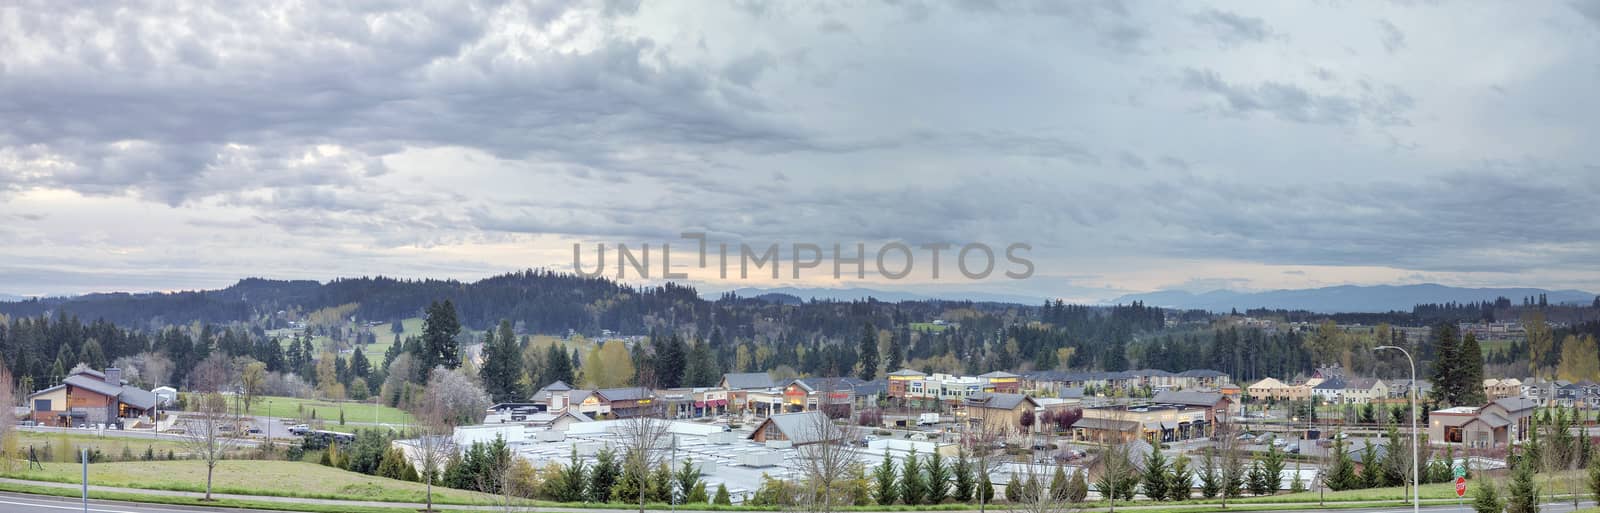 HAPPY VALLEY, OREGON - APRIL 3, 2014: City of Happy Valley downtown with city hall and shopping center panorama in the morning. Happy Valley is located in Clackamas County Oregon and incorporated in 1965.